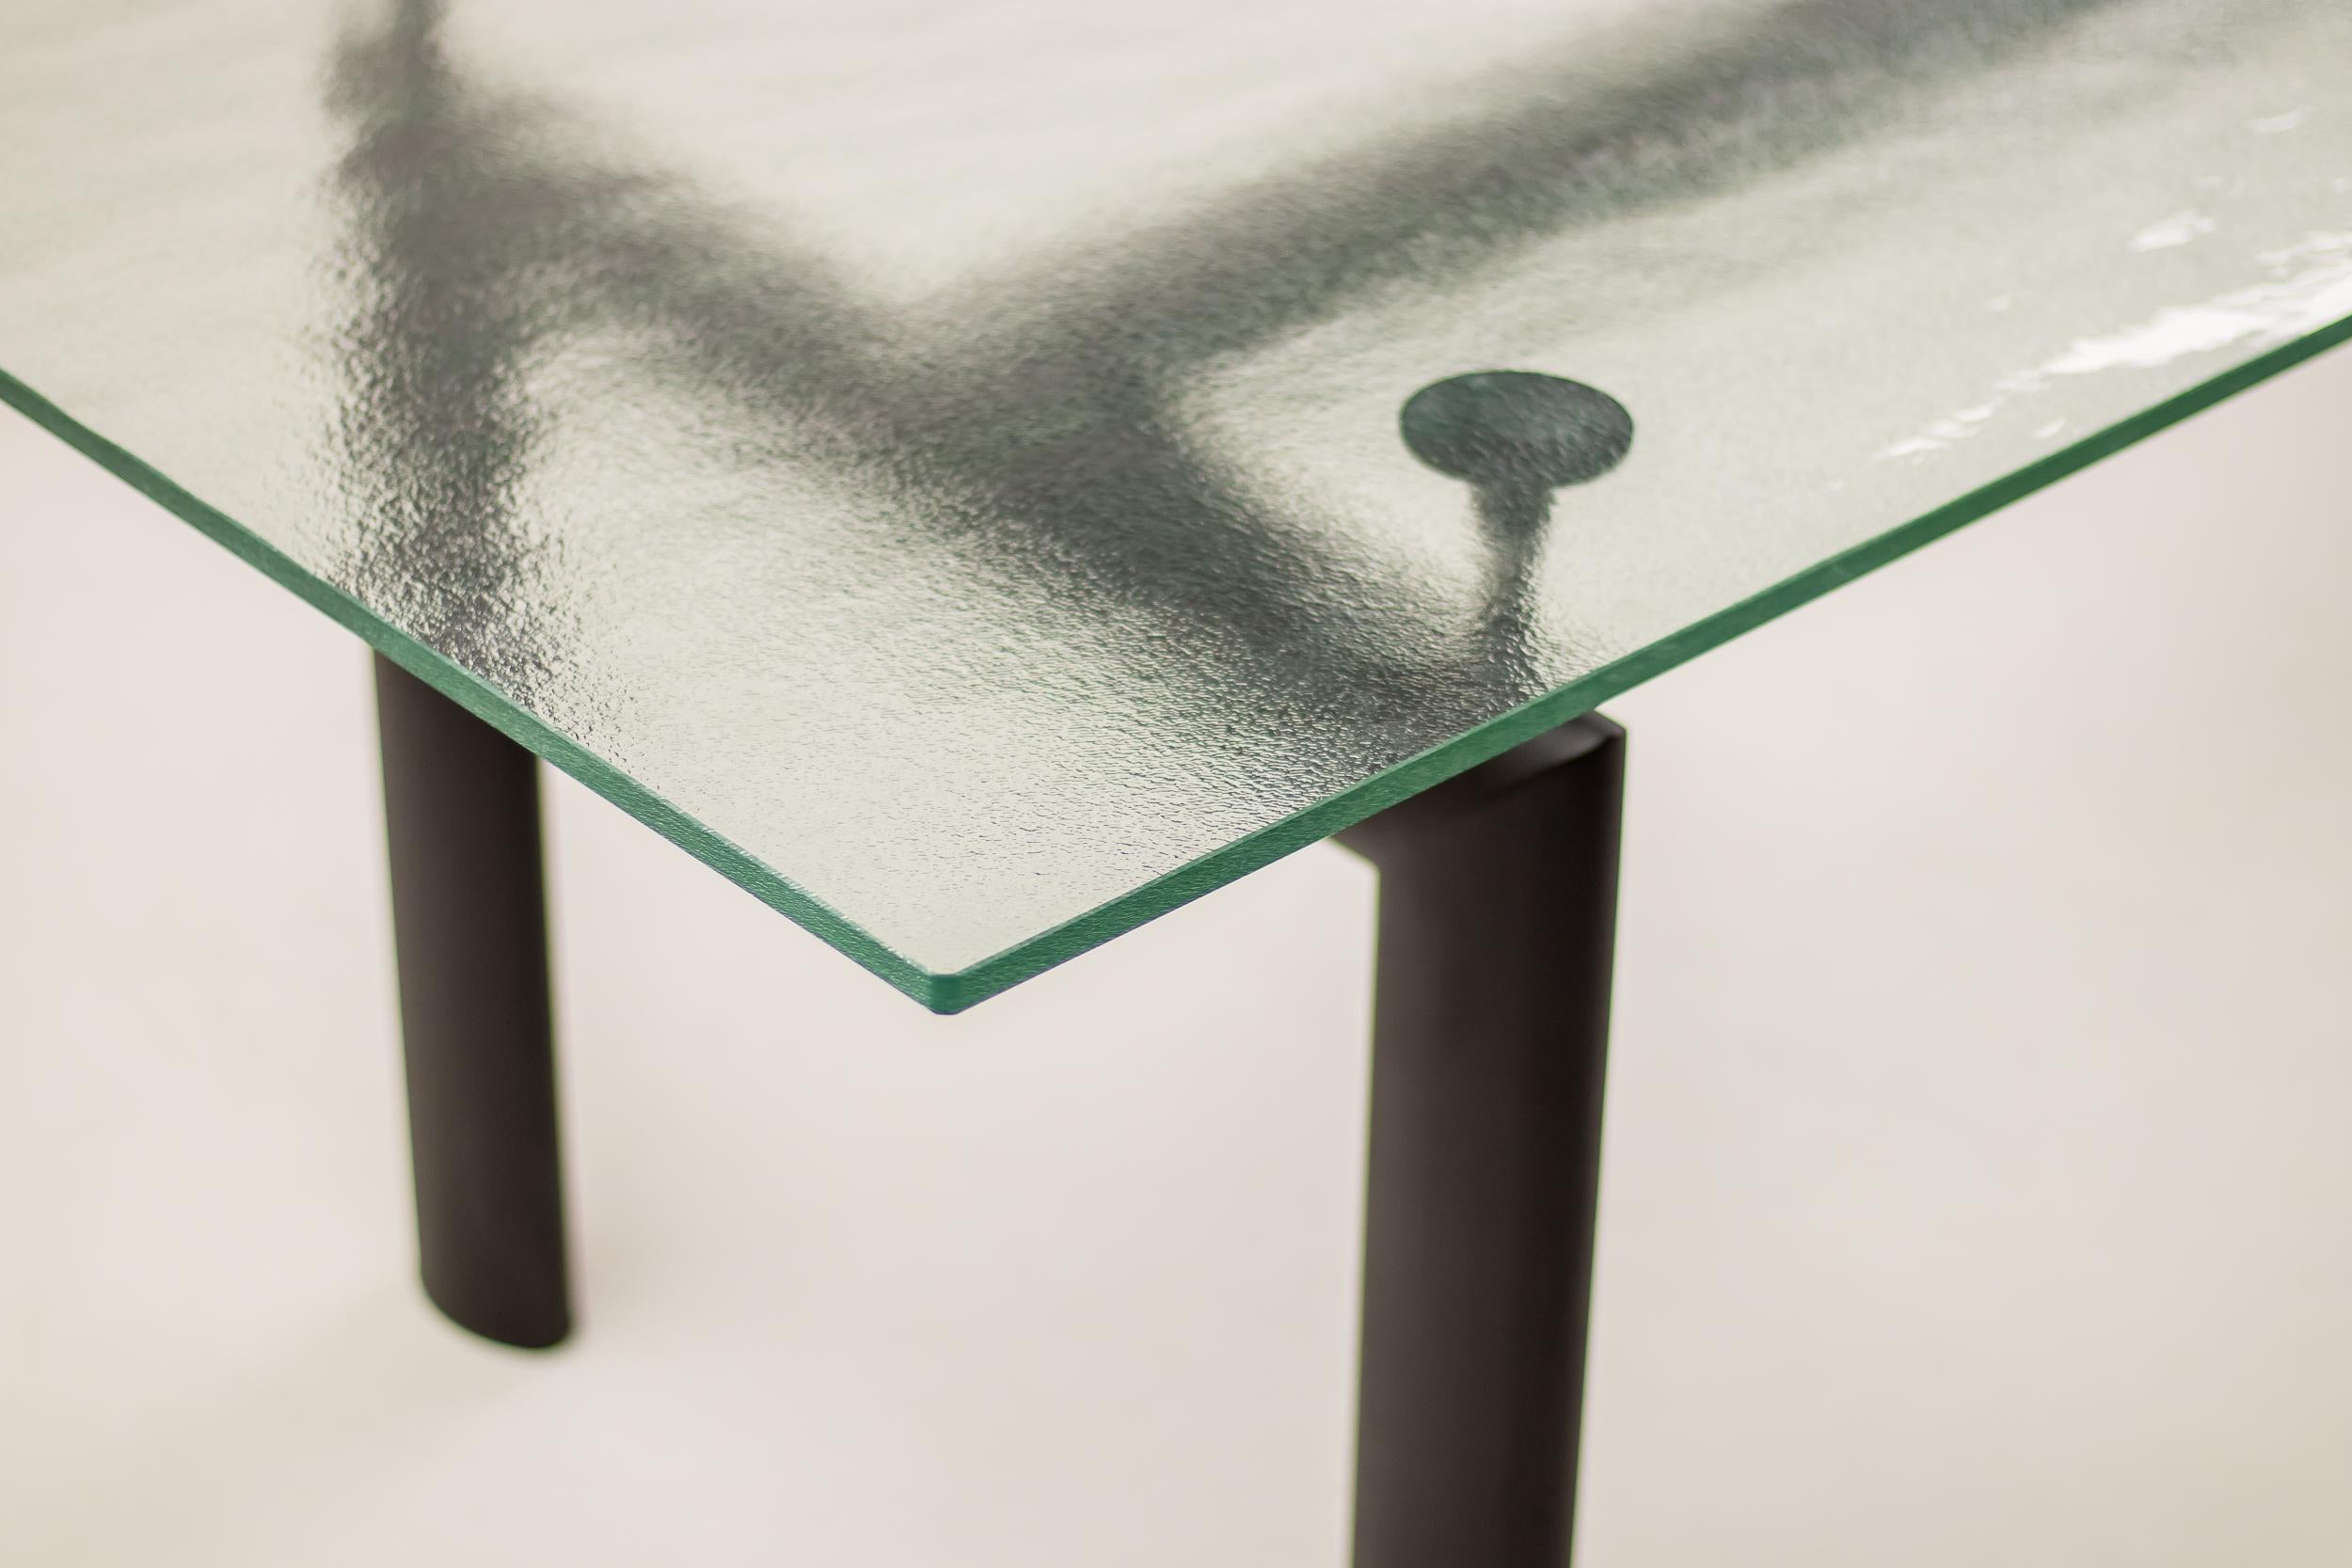 Aluminum Crystal LC6 Table by Le Corbusier, Jeanneret and Perriand for Cassina